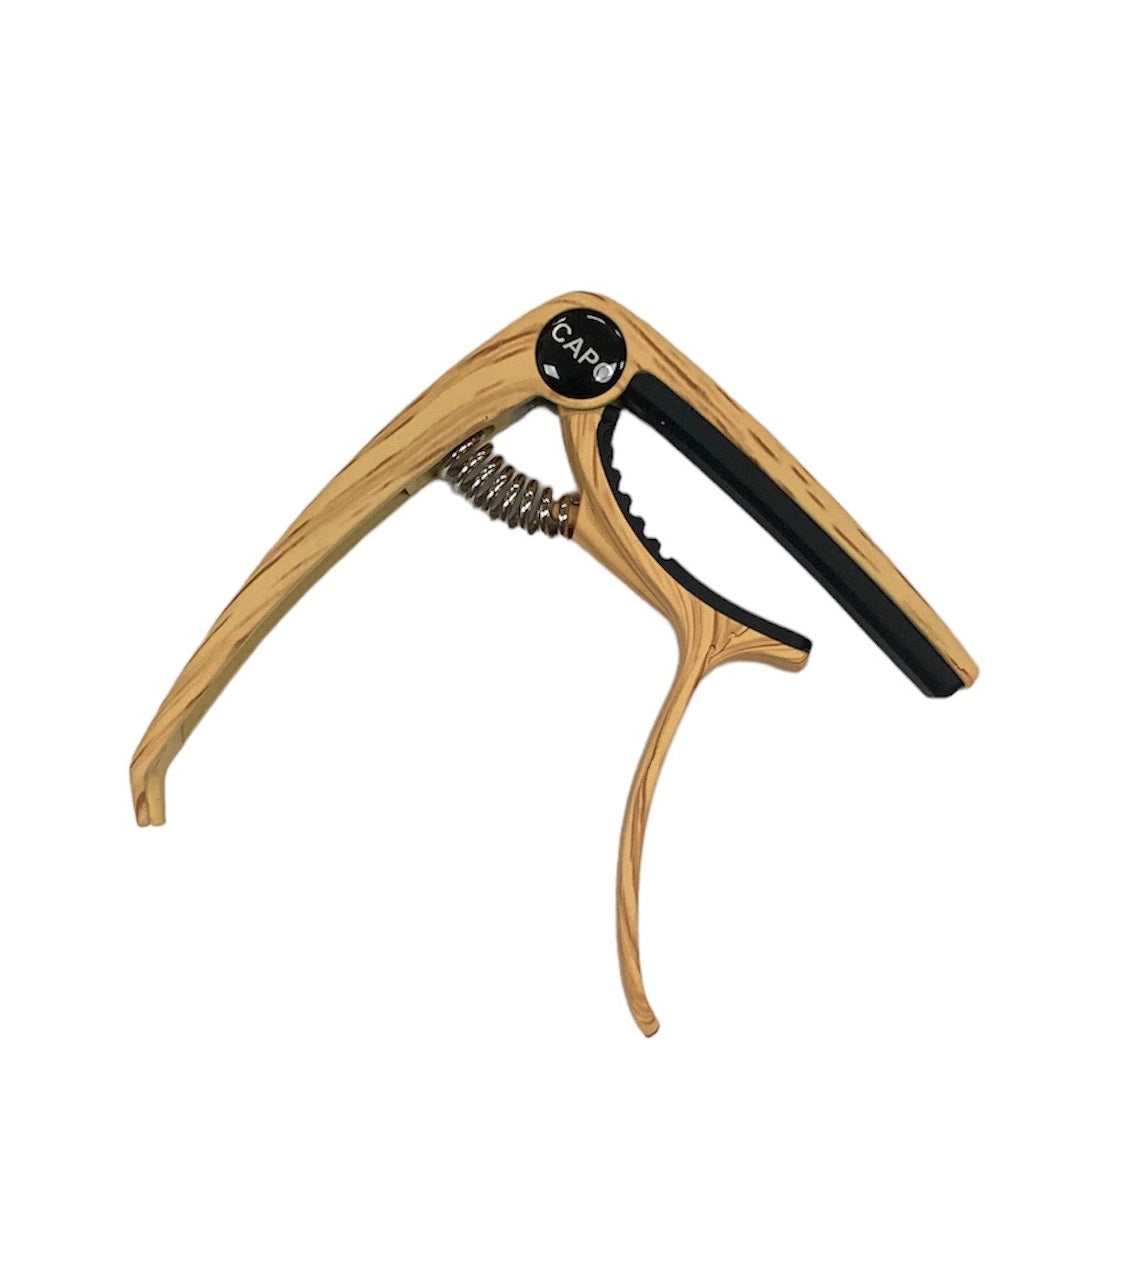 Guitar Capo - Acoustic or Electric - Wood